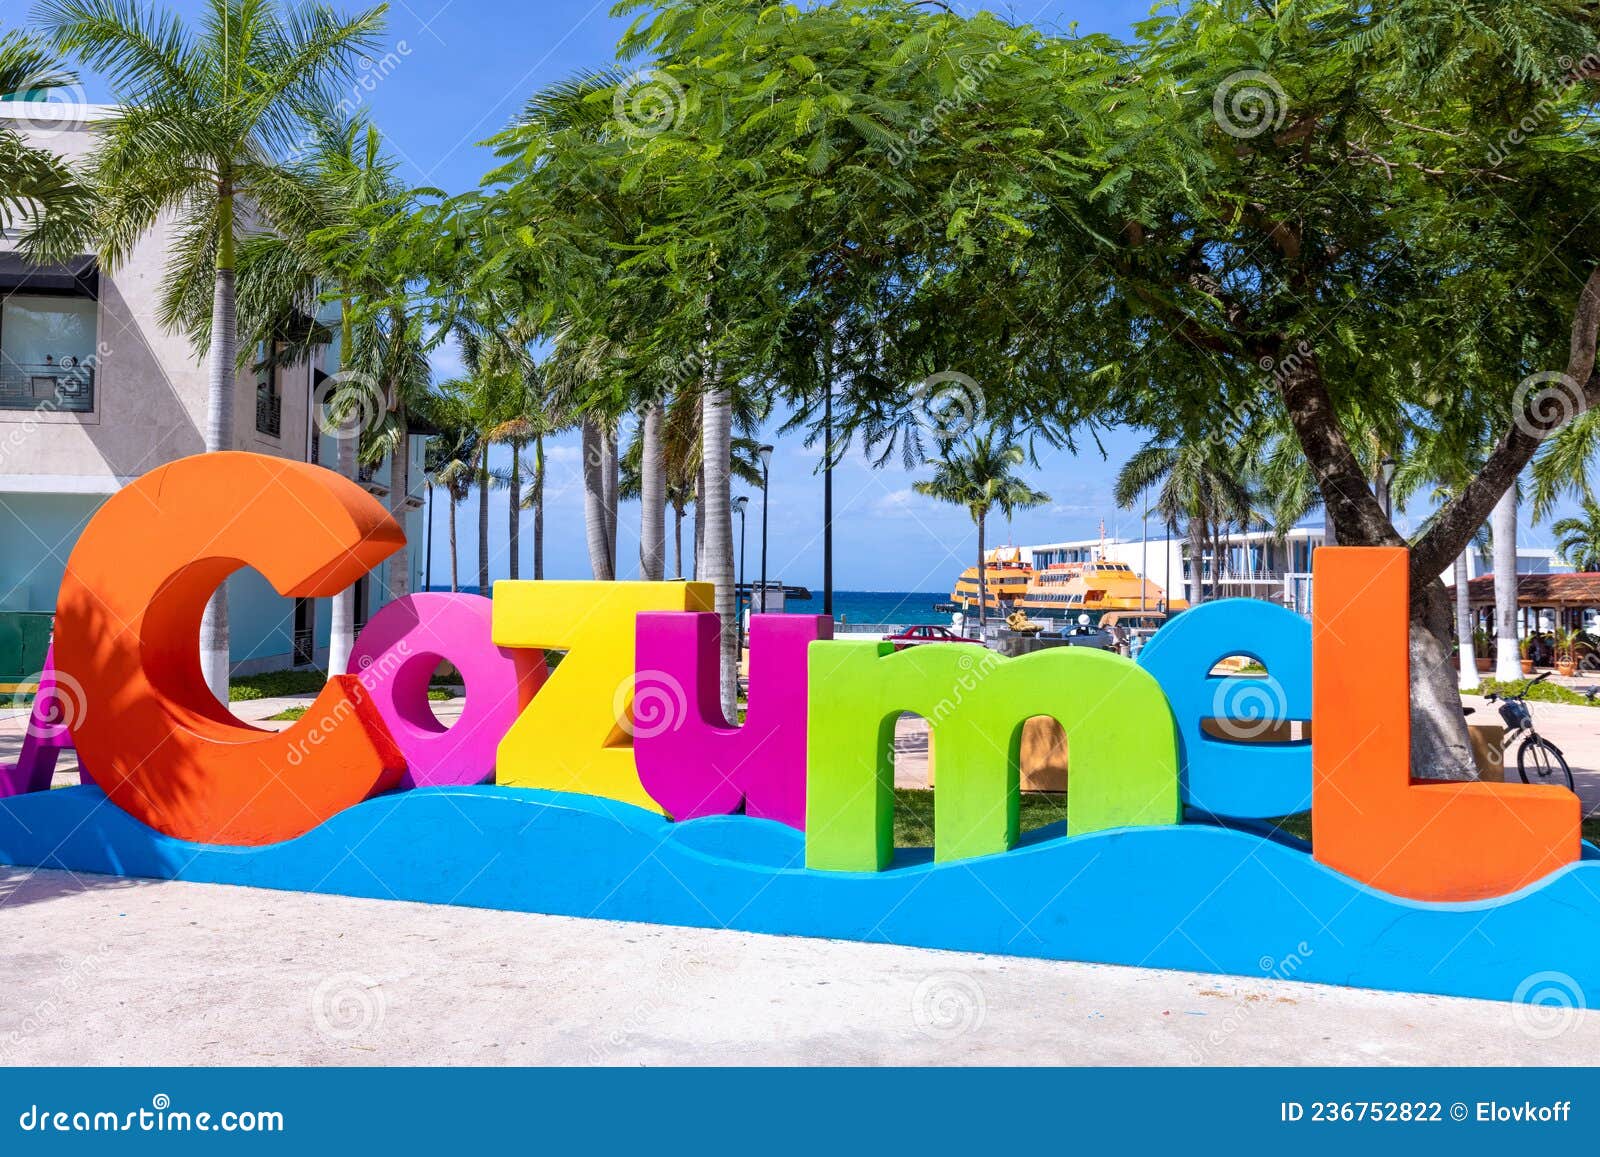 big cozumel letters at the central plaza of san miguel de cozumel near ocean malecon and cancun ferry terminal